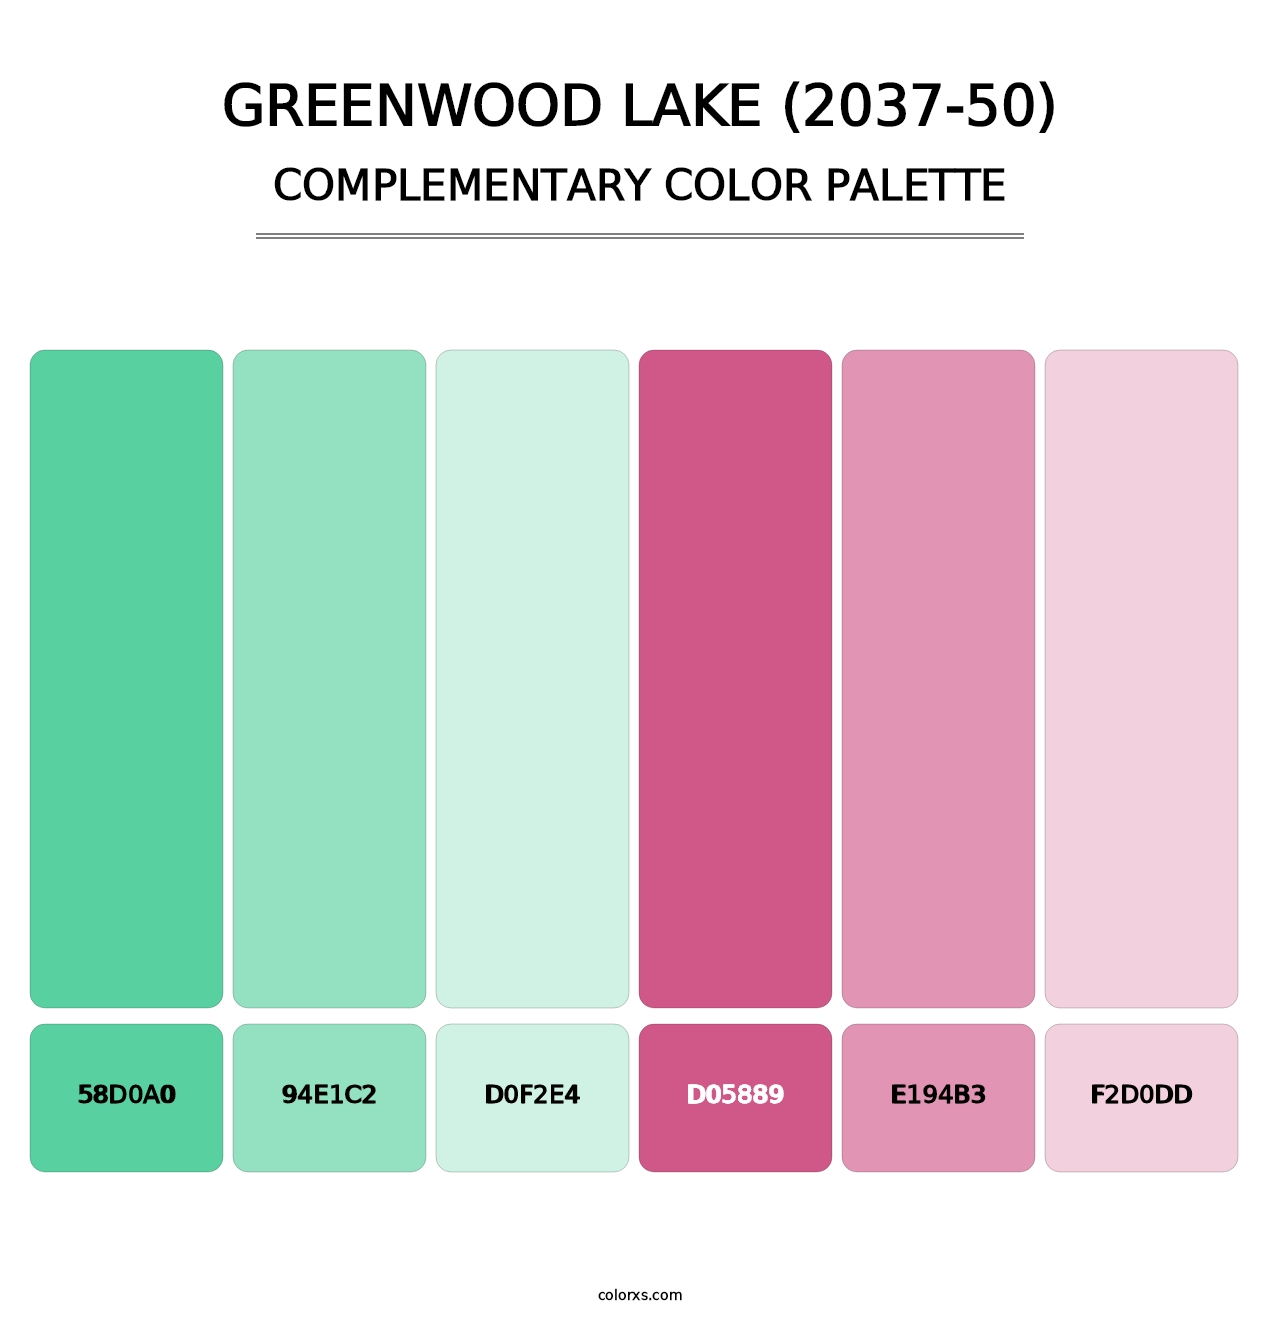 Greenwood Lake (2037-50) - Complementary Color Palette